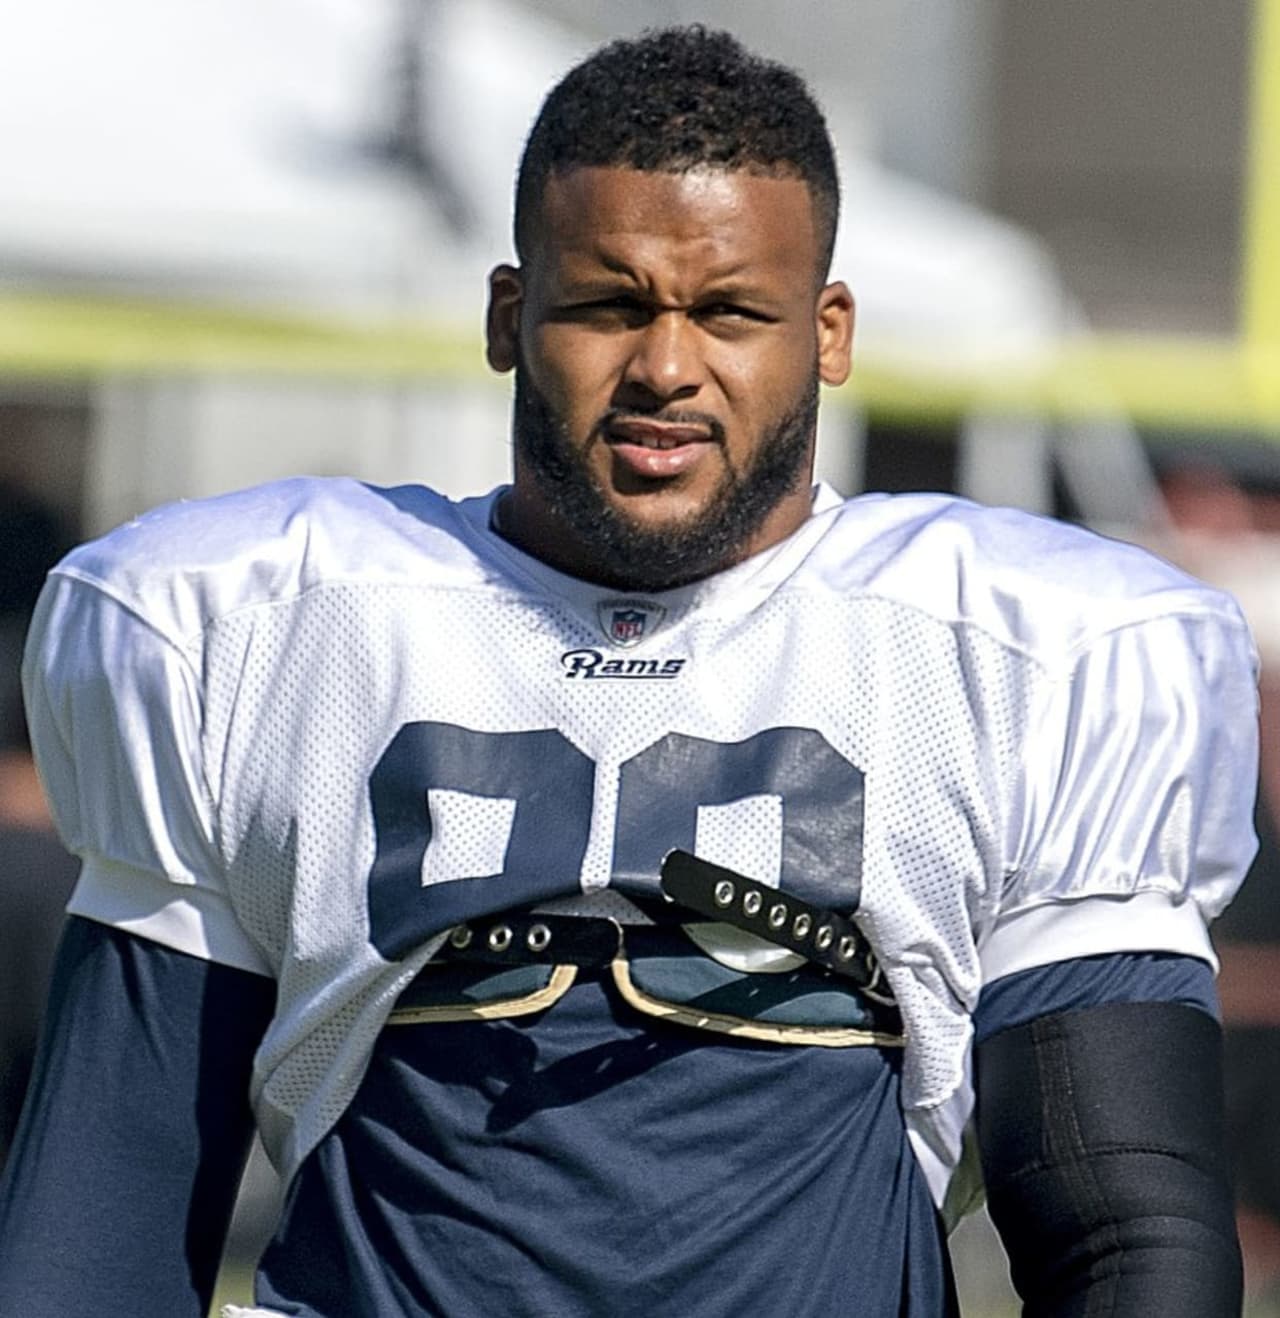 Los Angeles Rams defensive tackle, Aaron Donald, participating in a joint practice with the Oakland Raiders during the 2019 training camp.